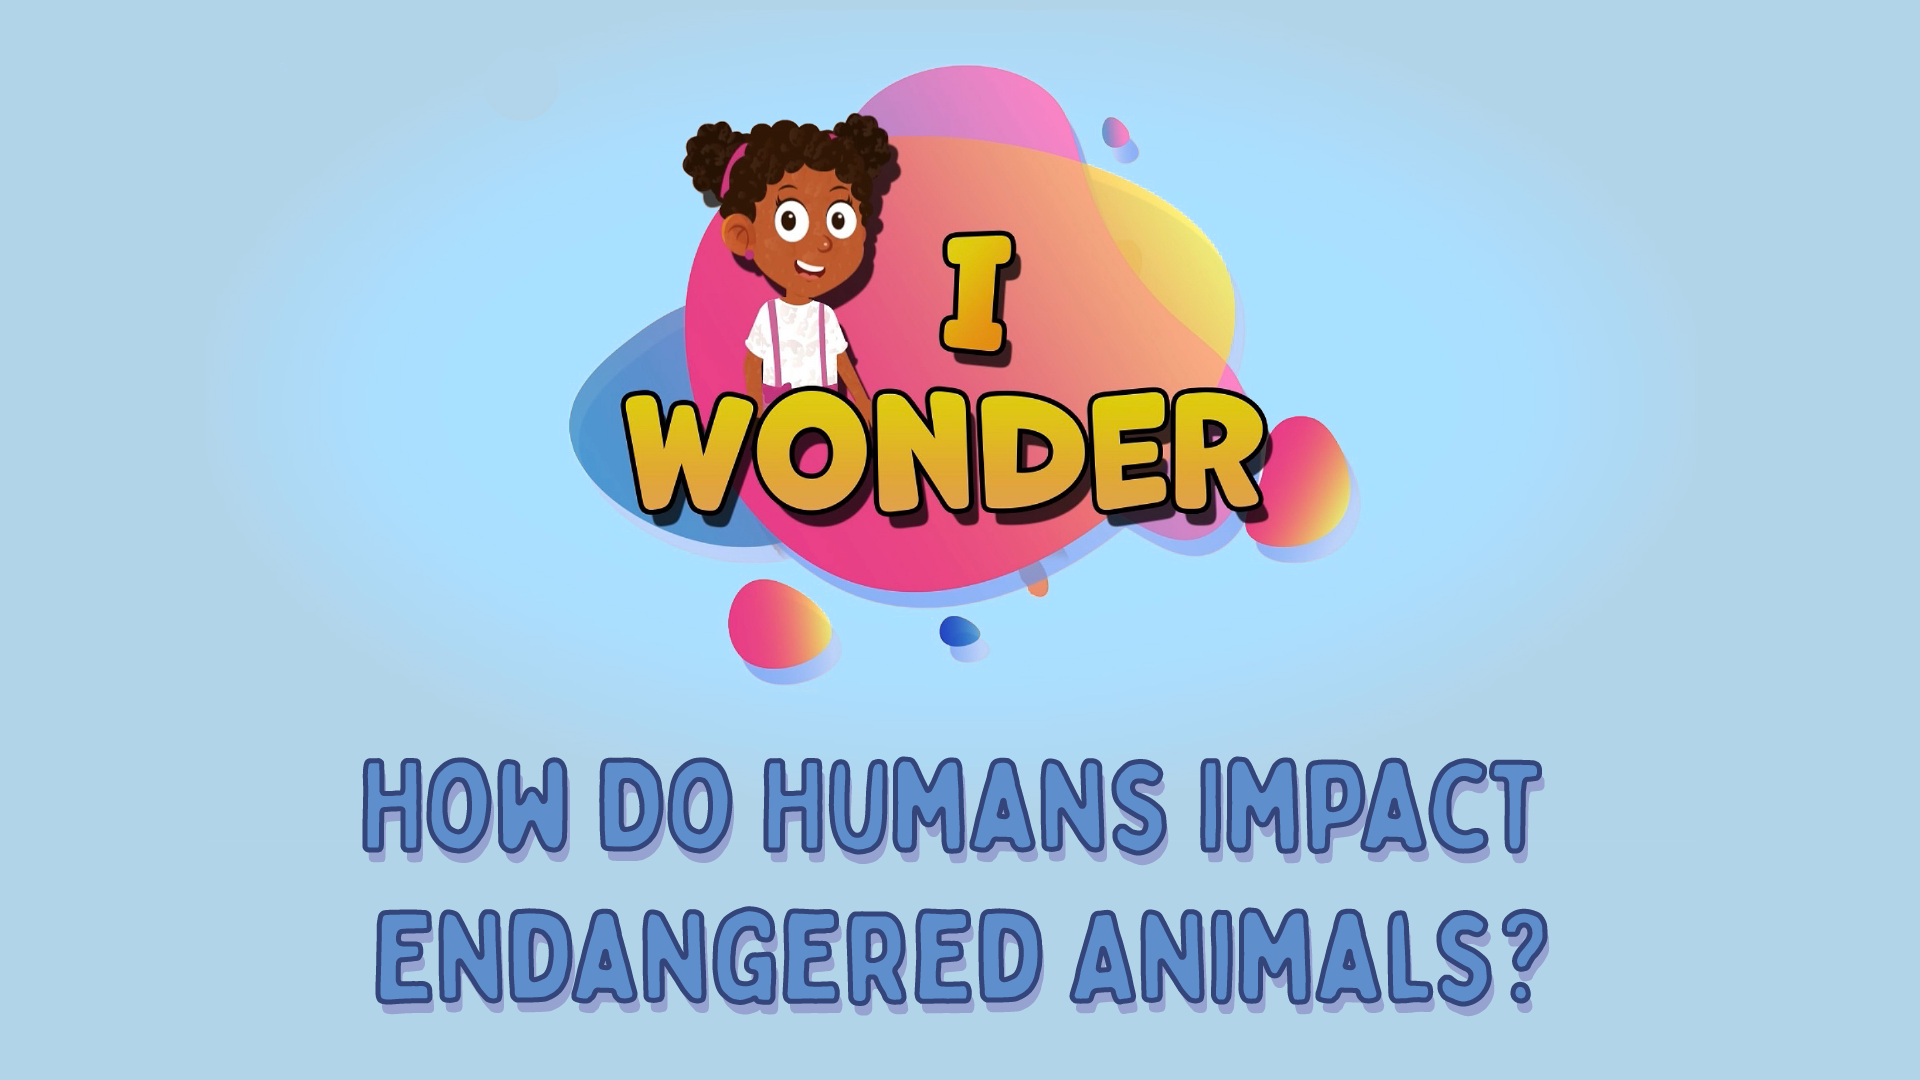 How Do Humans Impact Endangered Animals?